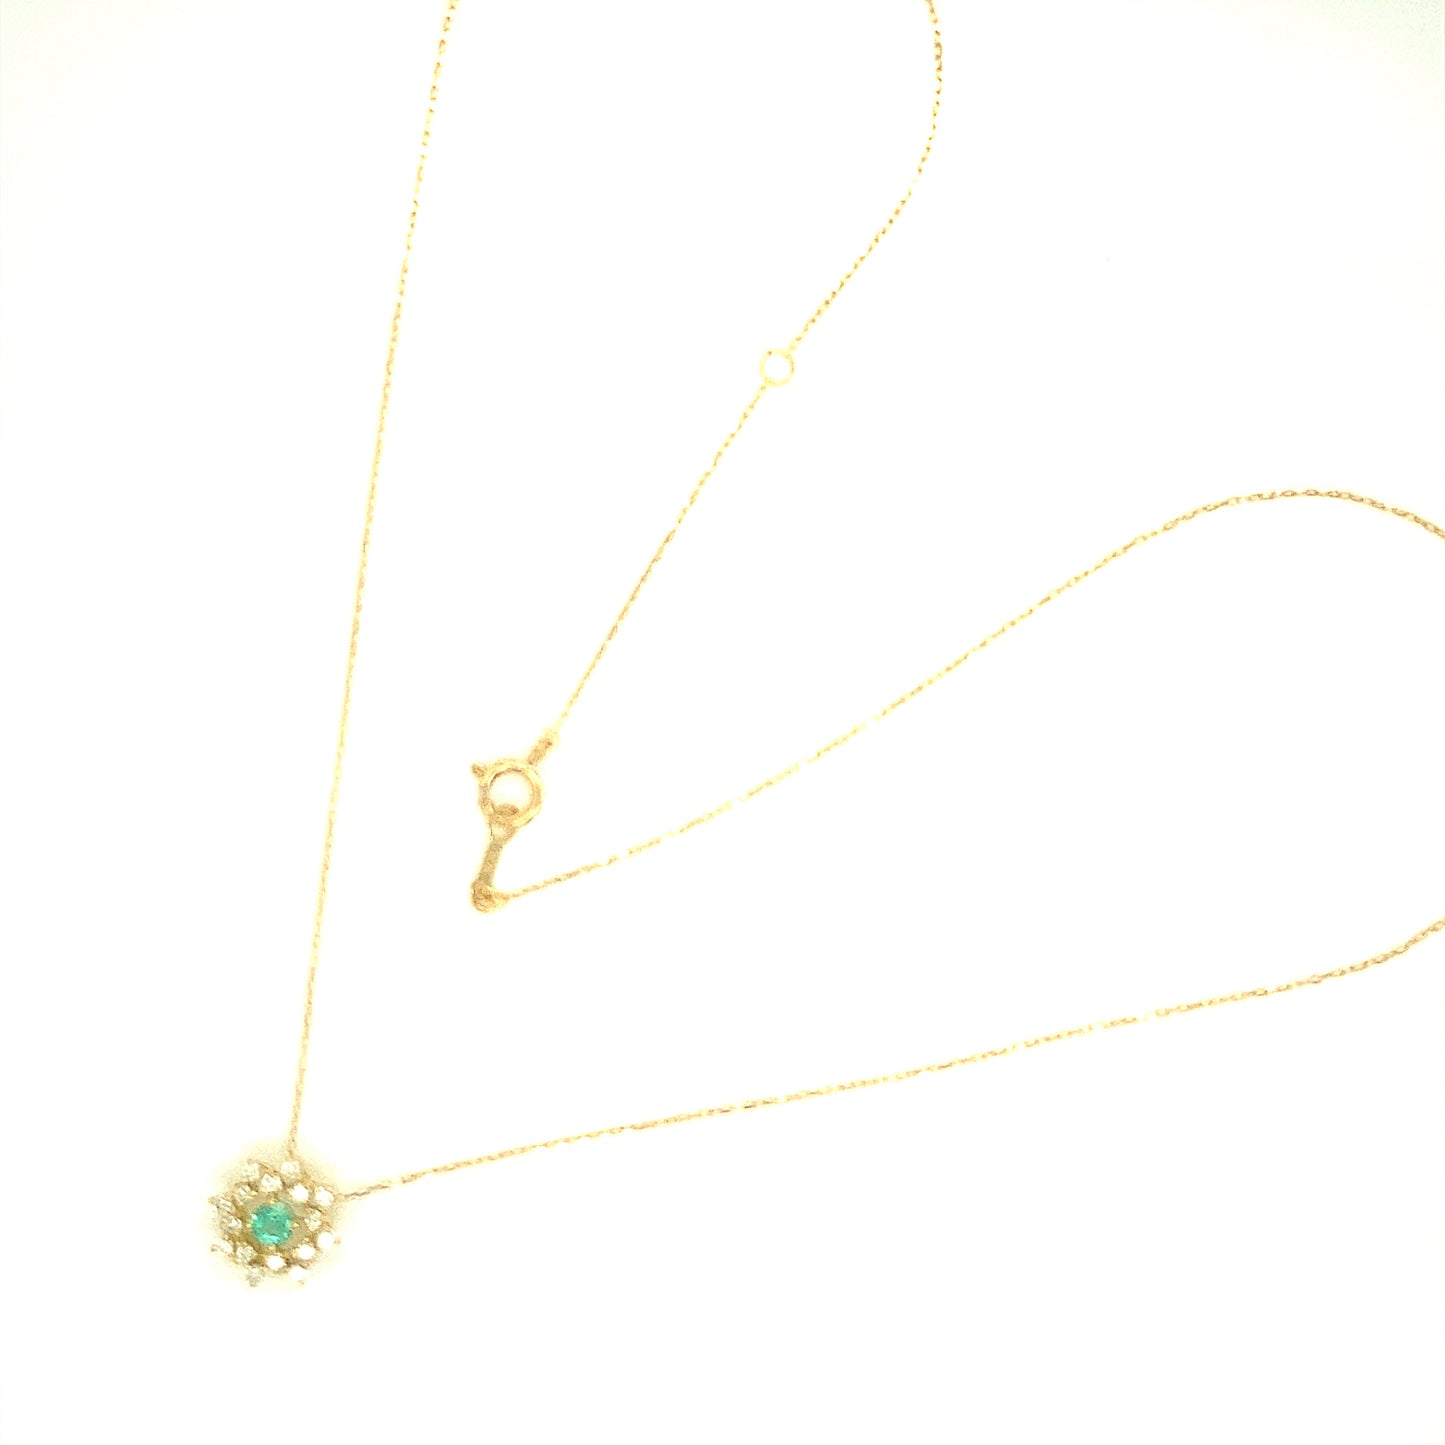 Flower Birthstone Necklace 0.16ct (May - Emerald)